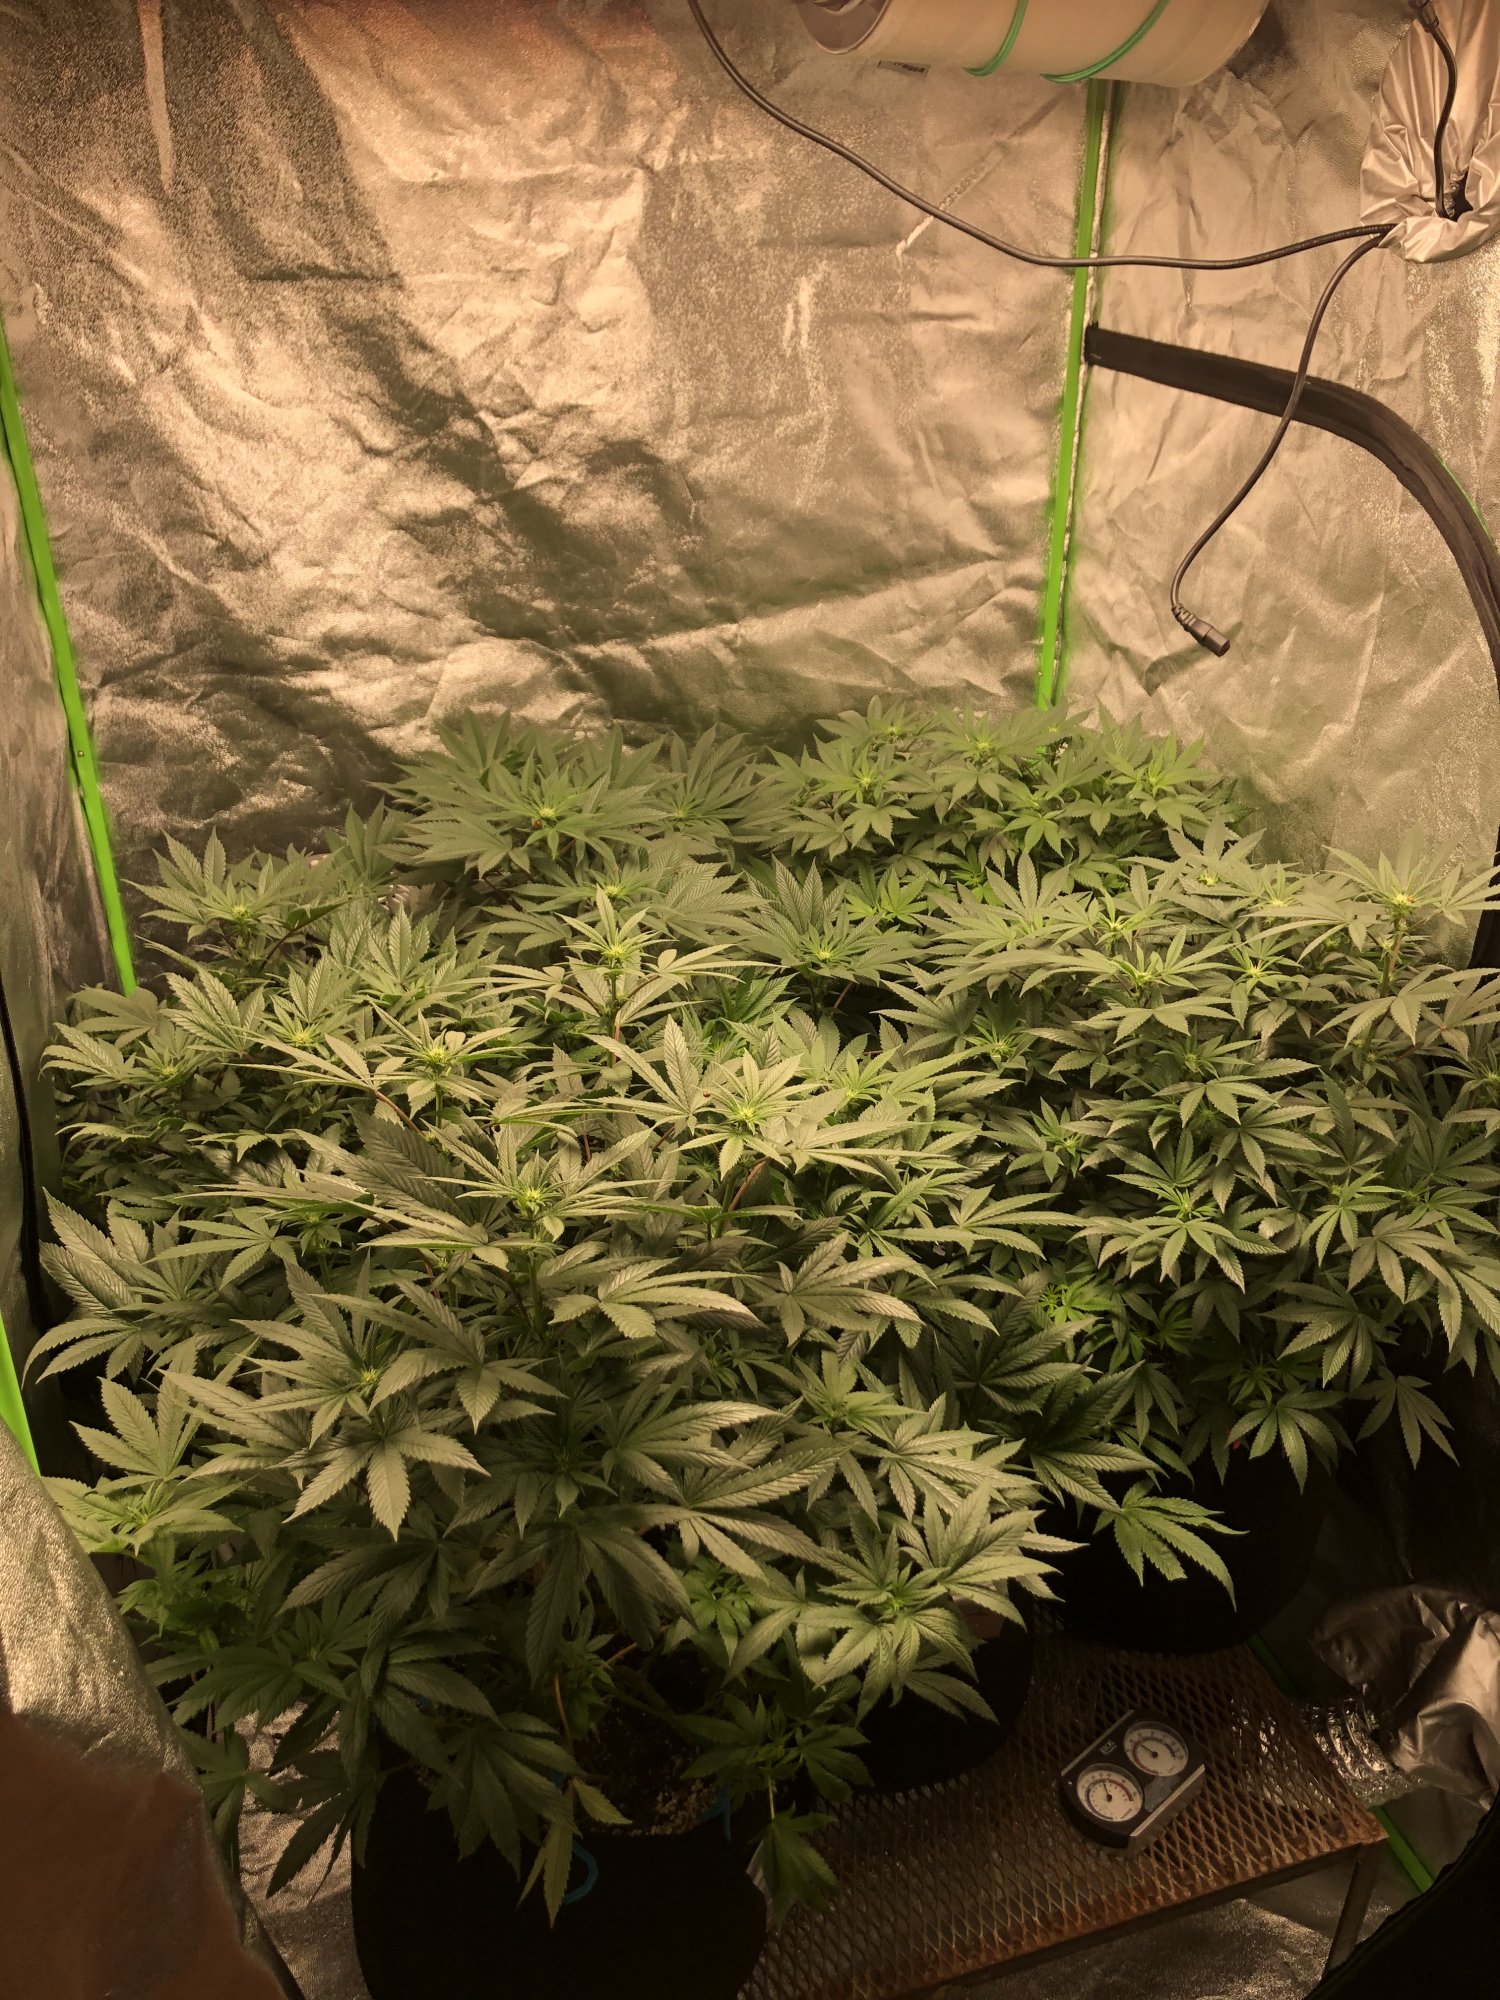 Defoliation pics two weeks into flower did i get carried away